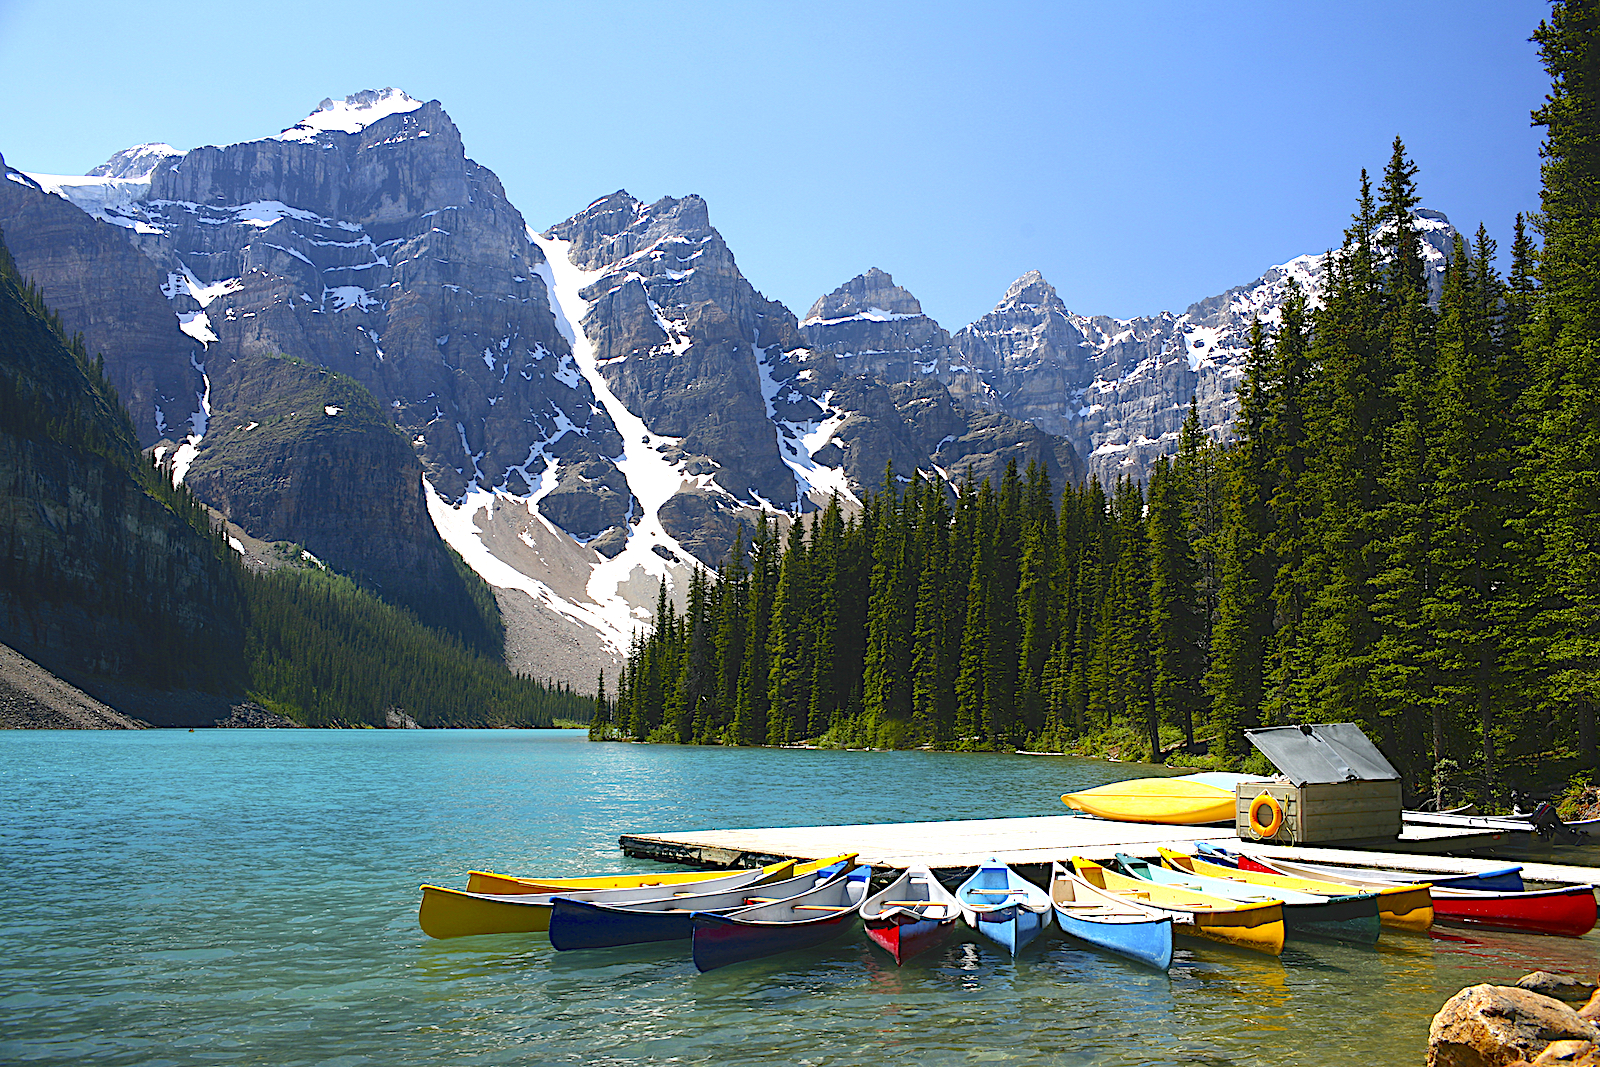 Moraine Lake (in Banff National Park) is fed by glaciers